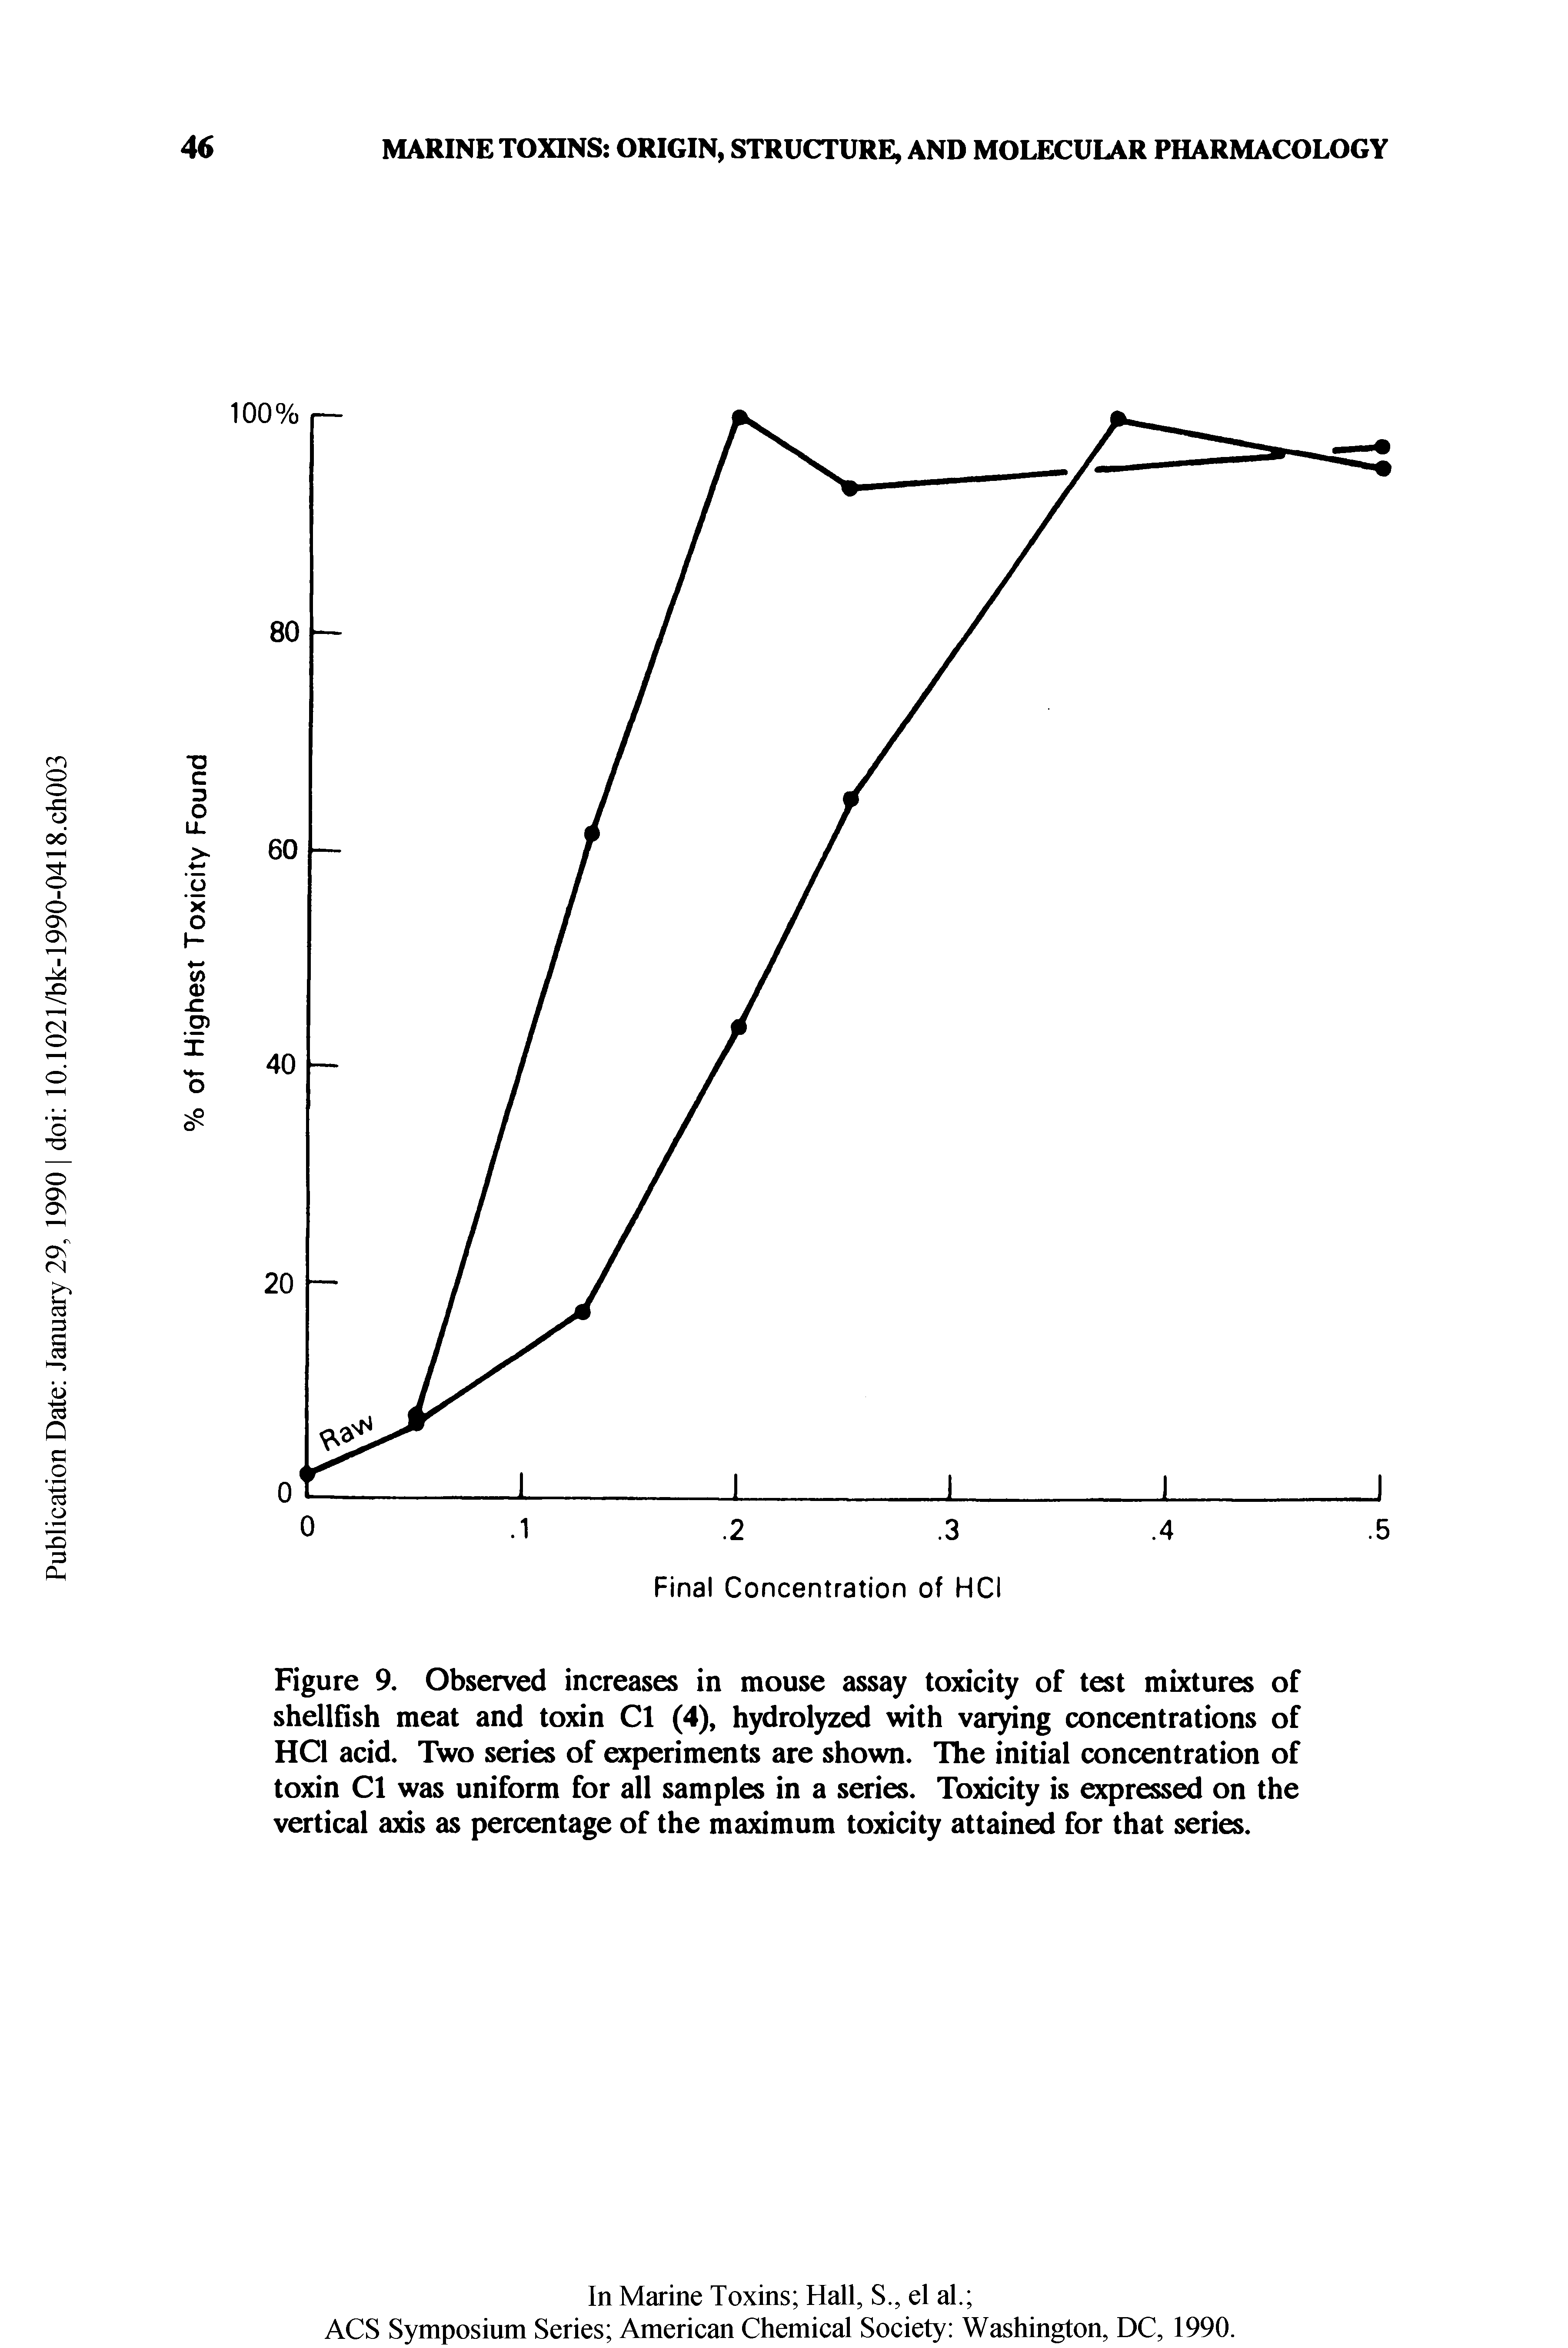 Figure 9. Observed increases in mouse assay toxicity of test mixtures of shellfish meat and toxin Cl (4), hydrolyzed with varying concentrations of HCI acid. Two series of experiments are shown. The initial concentration of toxin Cl was uniform for all samples in a series. Toxicity is expressed on the vertical axis as percentage of the maximum toxicity attained for that series.